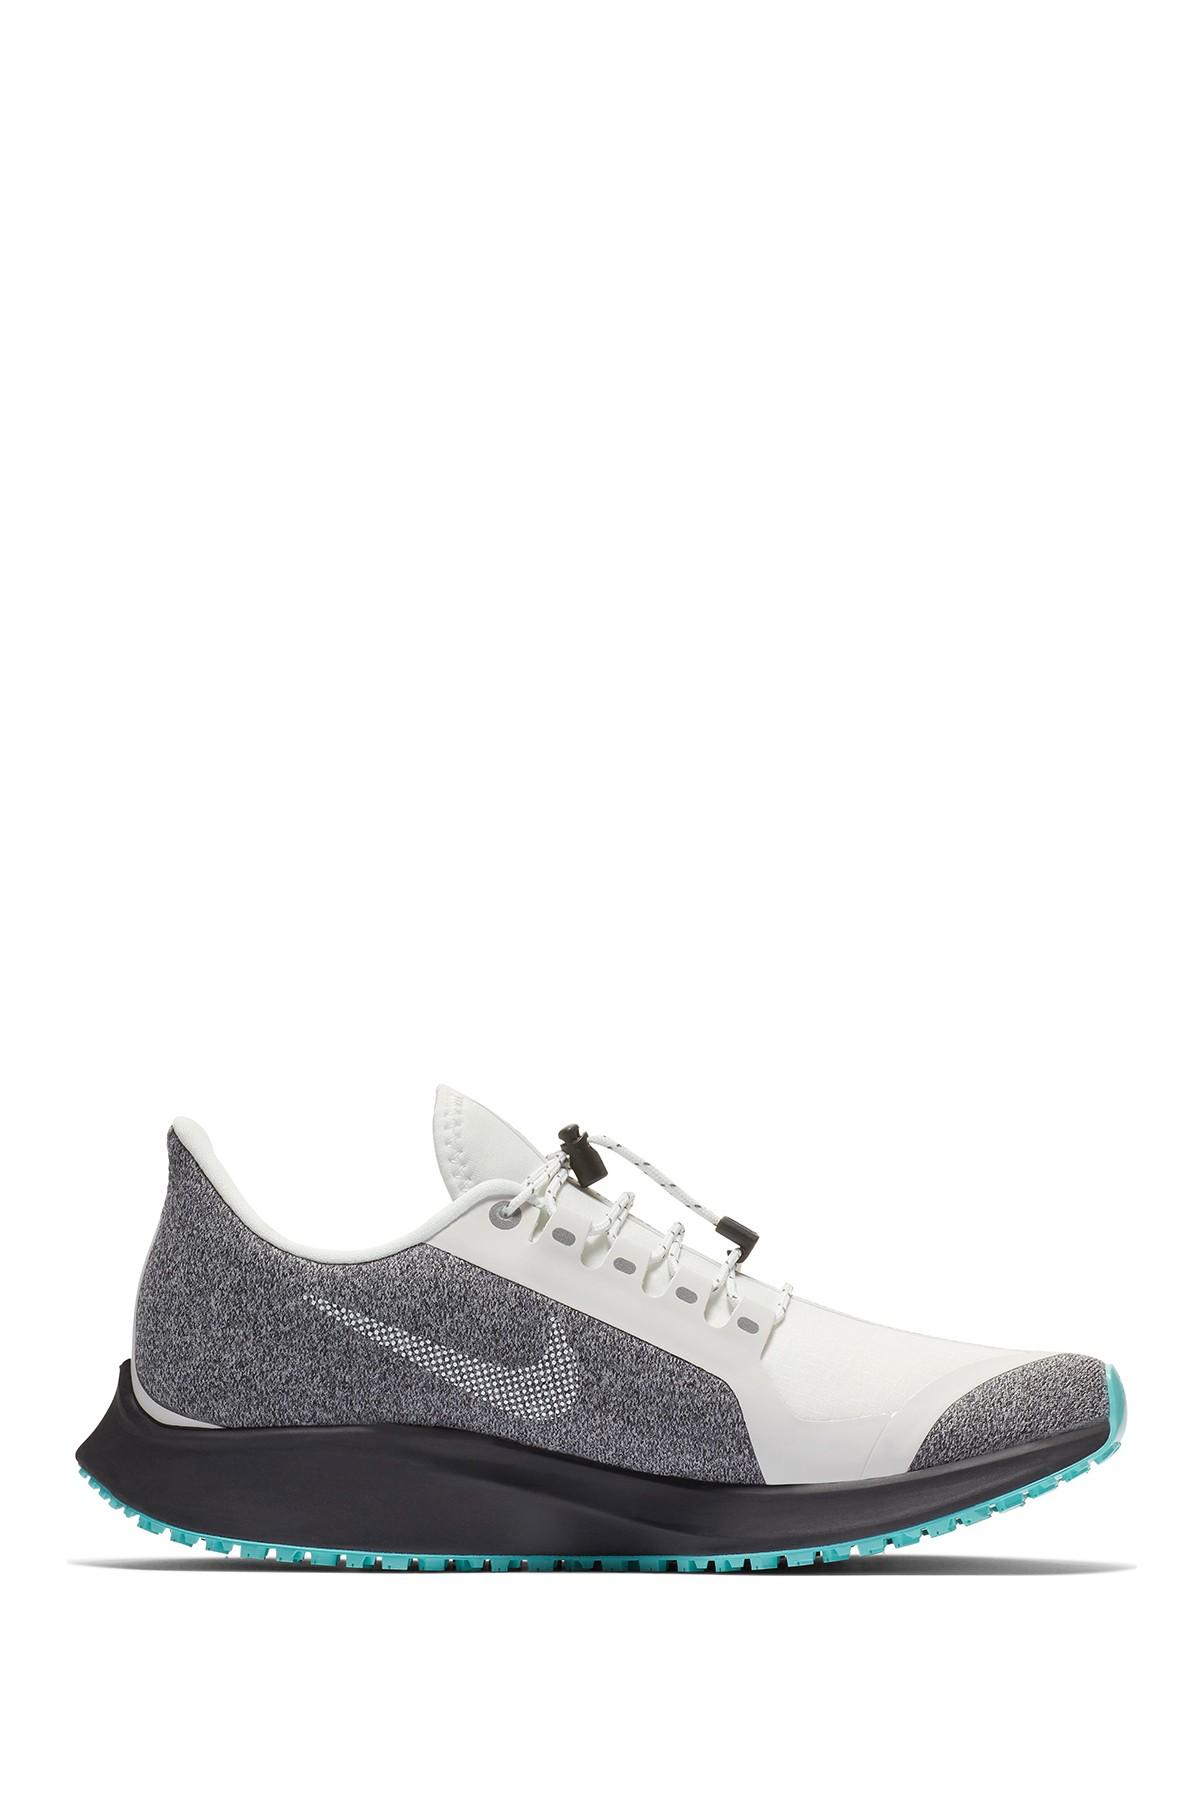 Nike Zoom Pegasus Shield Gs Water Repellent in White | Lyst